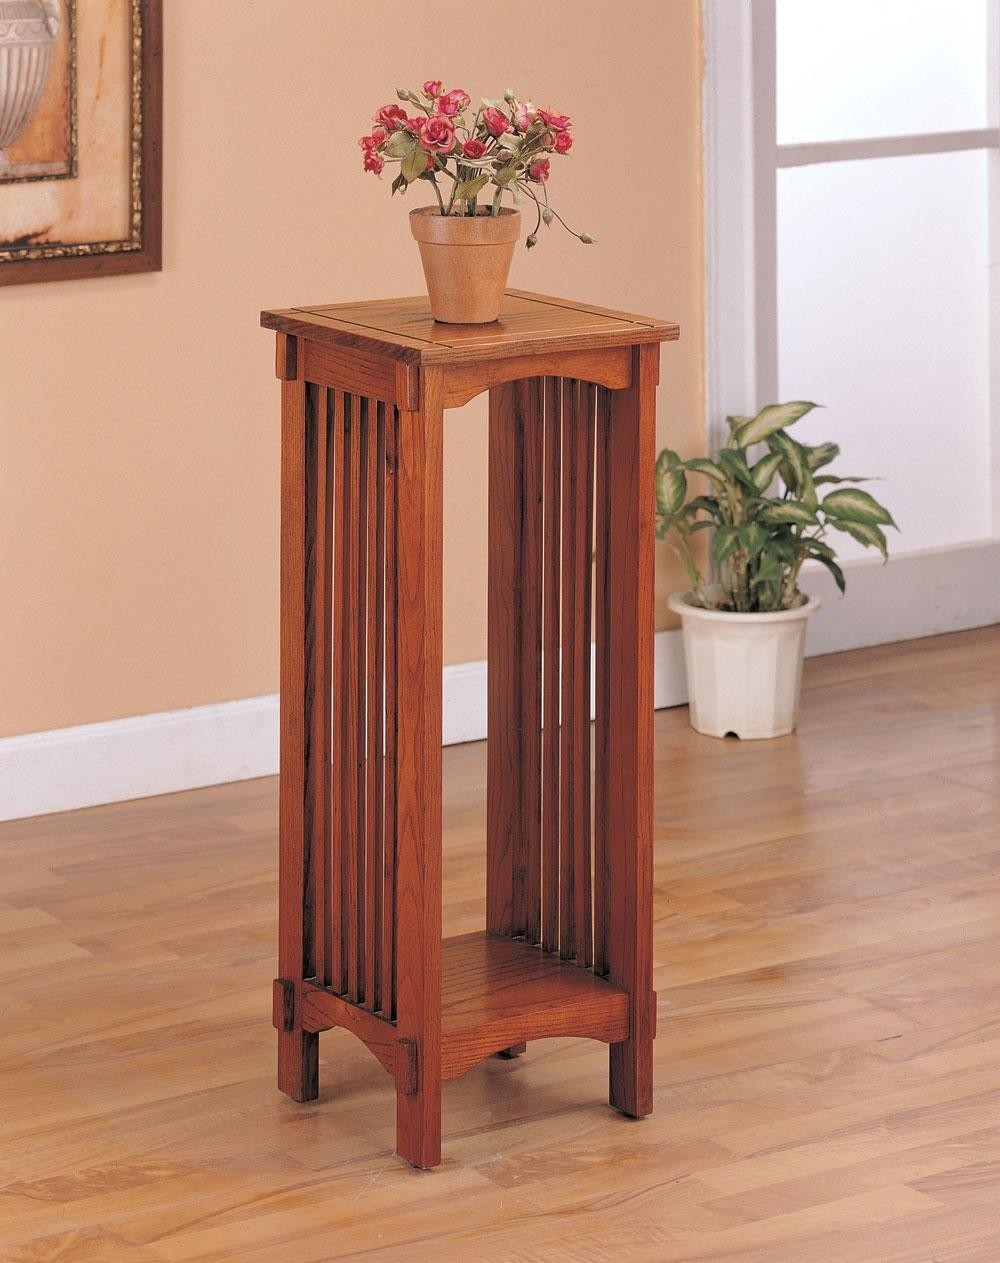 Oak plant stand 4040 from coaster 4040 coleman furniture